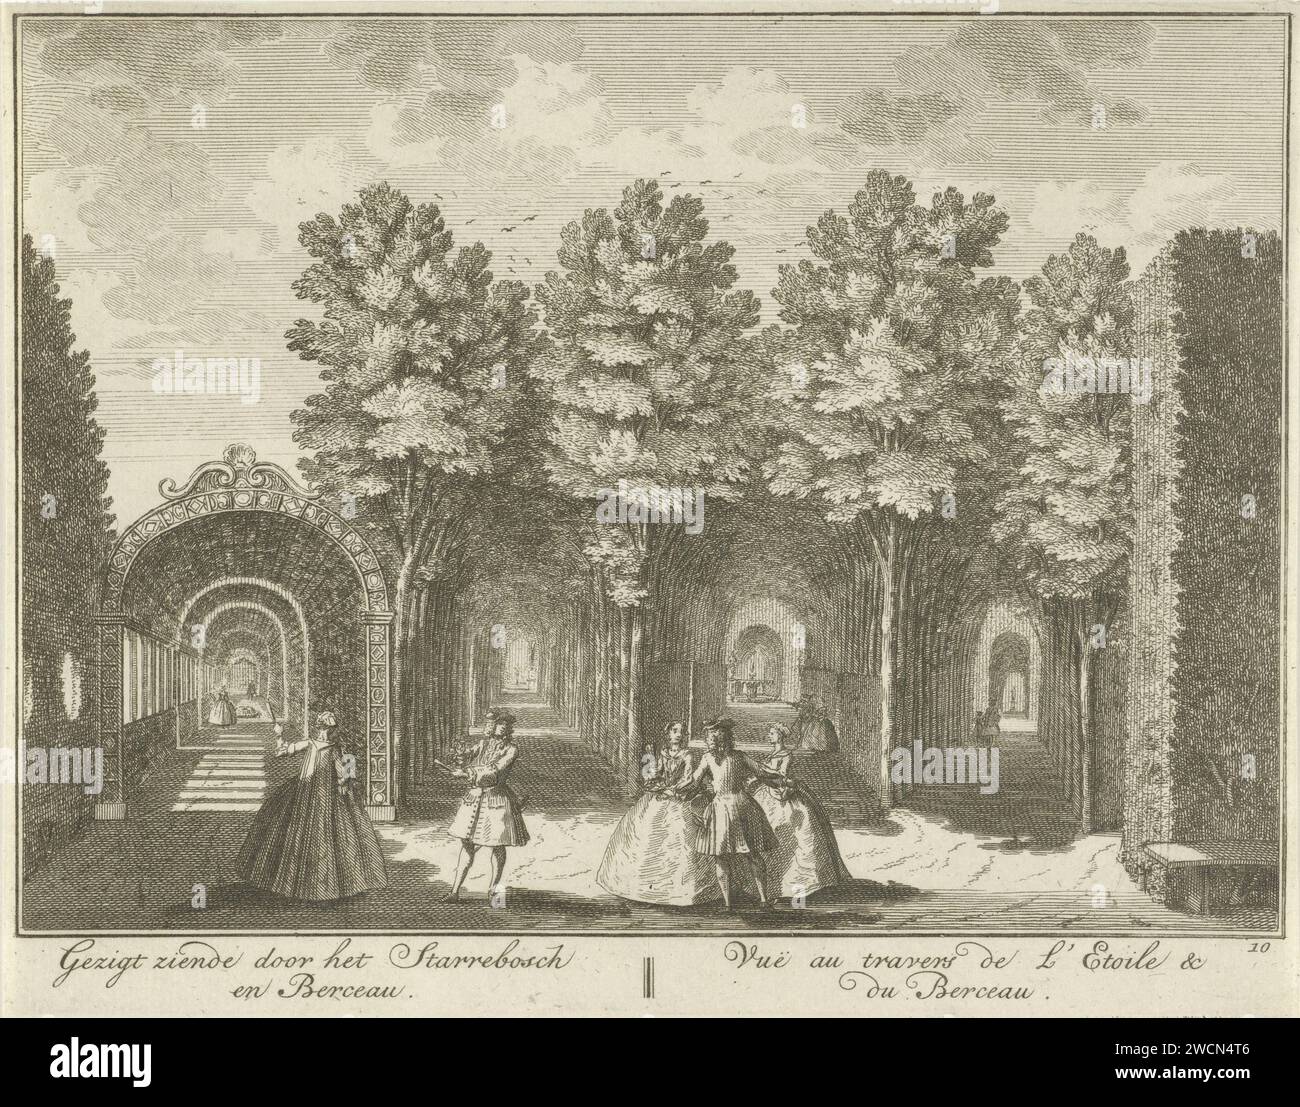 View of the Sterrenbos in the garden of Huis ter Meer in Maarssen, Hendrik de Leth, c. 1740 print View of the star forest in the French garden of Huis ter Meer in Maarssen. Figures walk in the foreground, a berceau on the left. The print is part of a series with 26 faces at Huis ter Meer and the accompanying estate in Maarssen.  paper etching country-house. French or architectonic garden; formal garden House Ter Meer Stock Photo